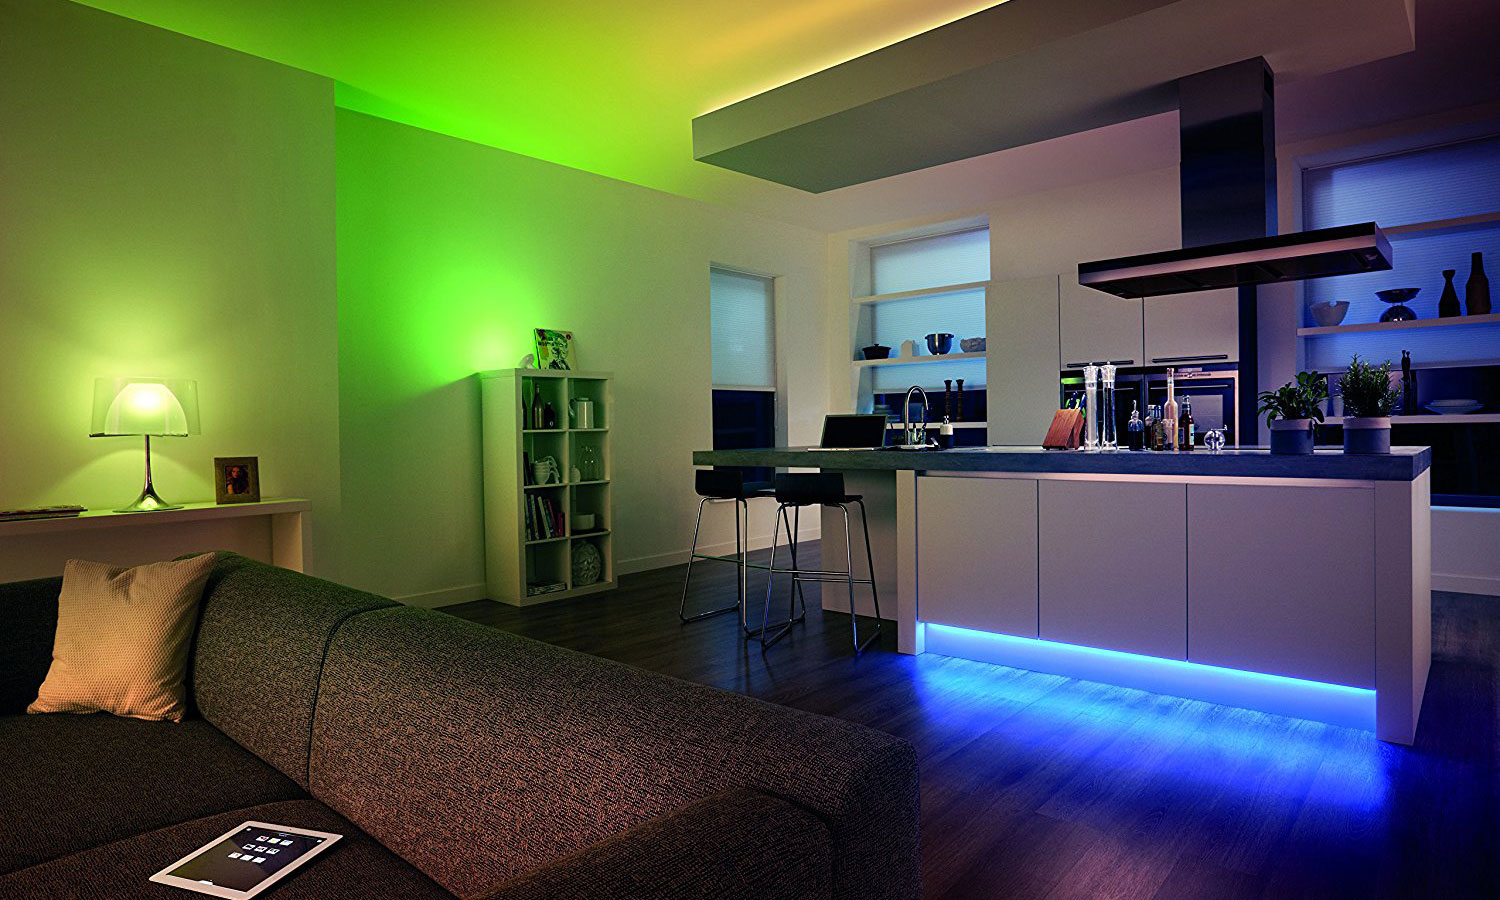 LED strip lights: how much electricity does LED strip lights use?